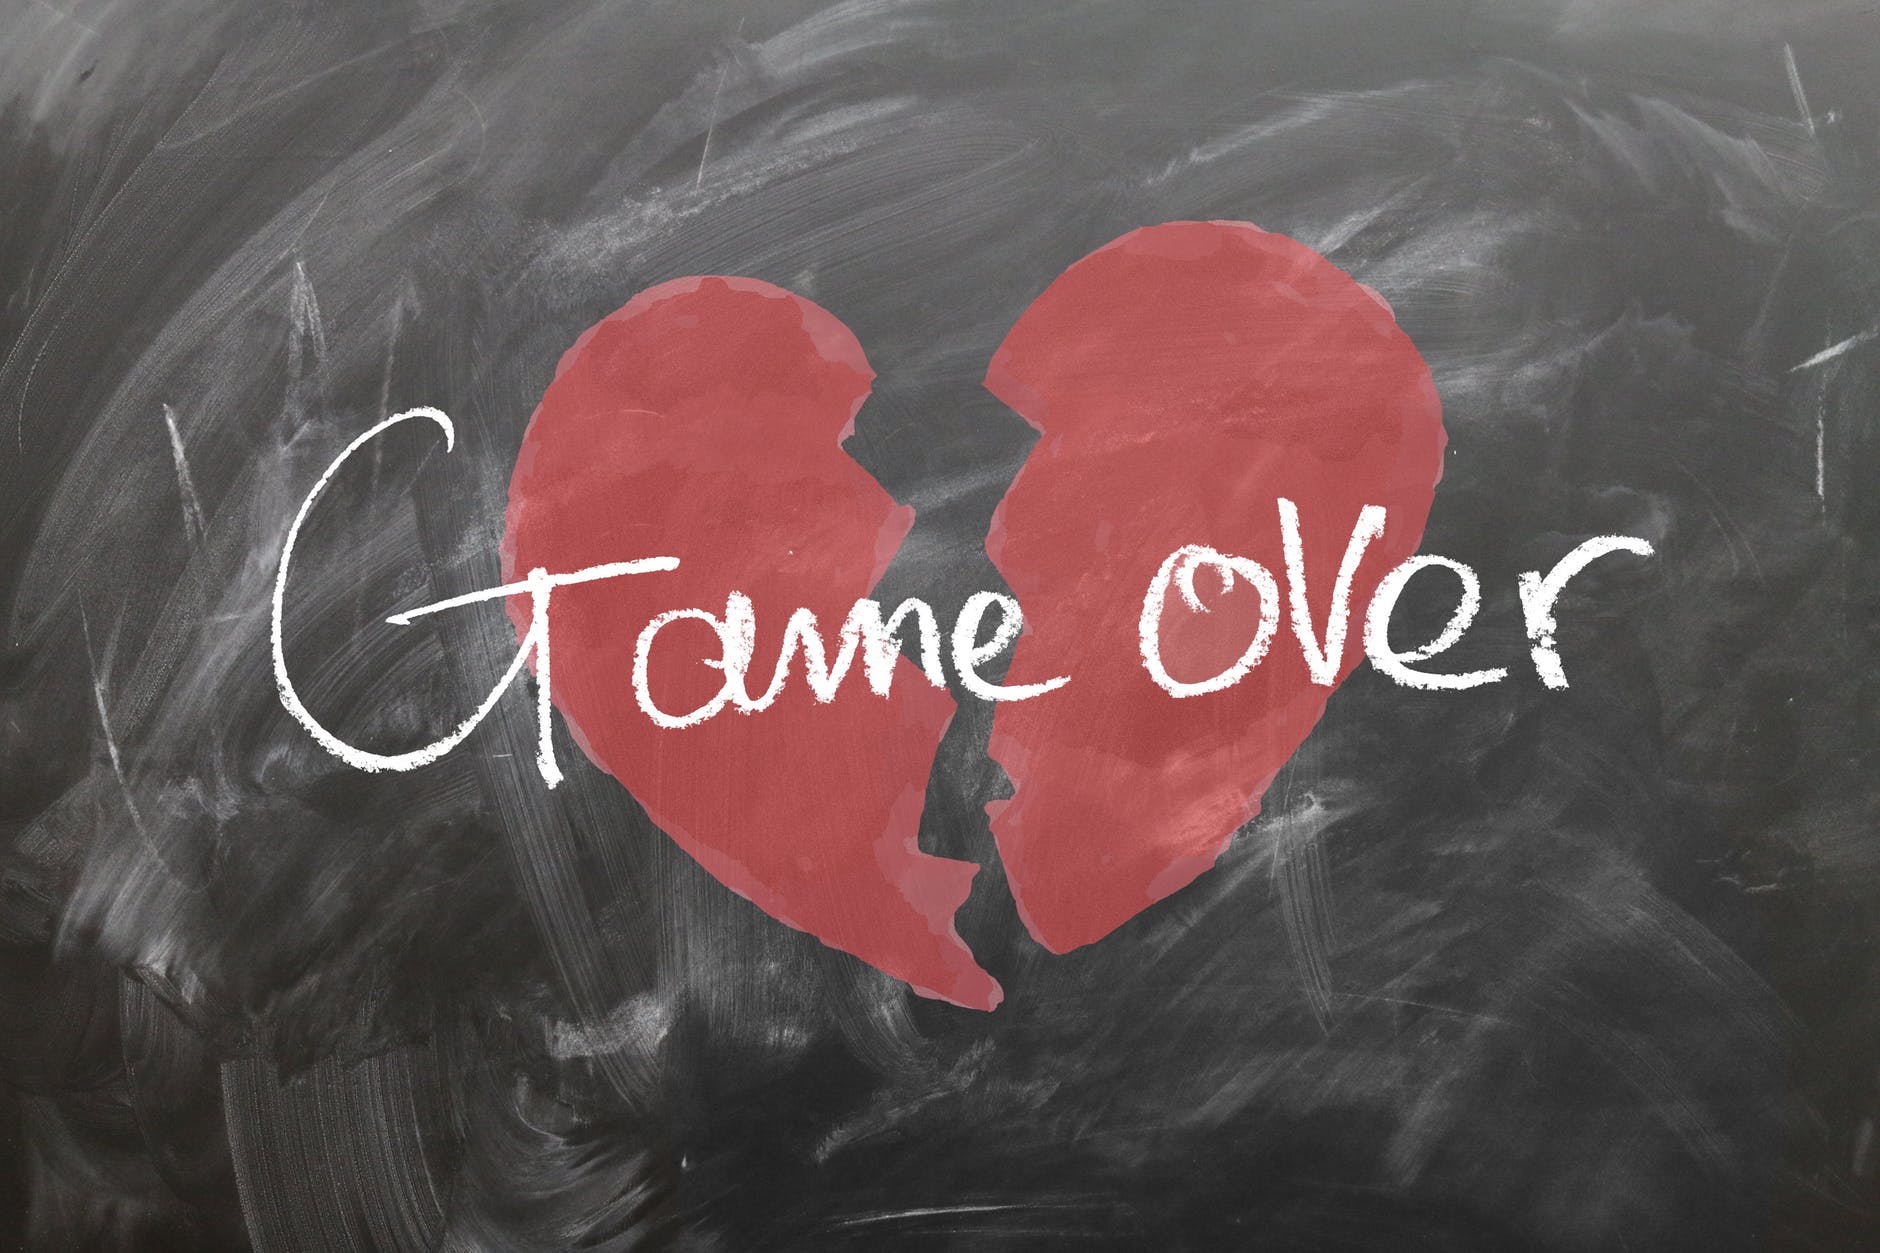 A broken heart and the words 'game over' on a chalkboard